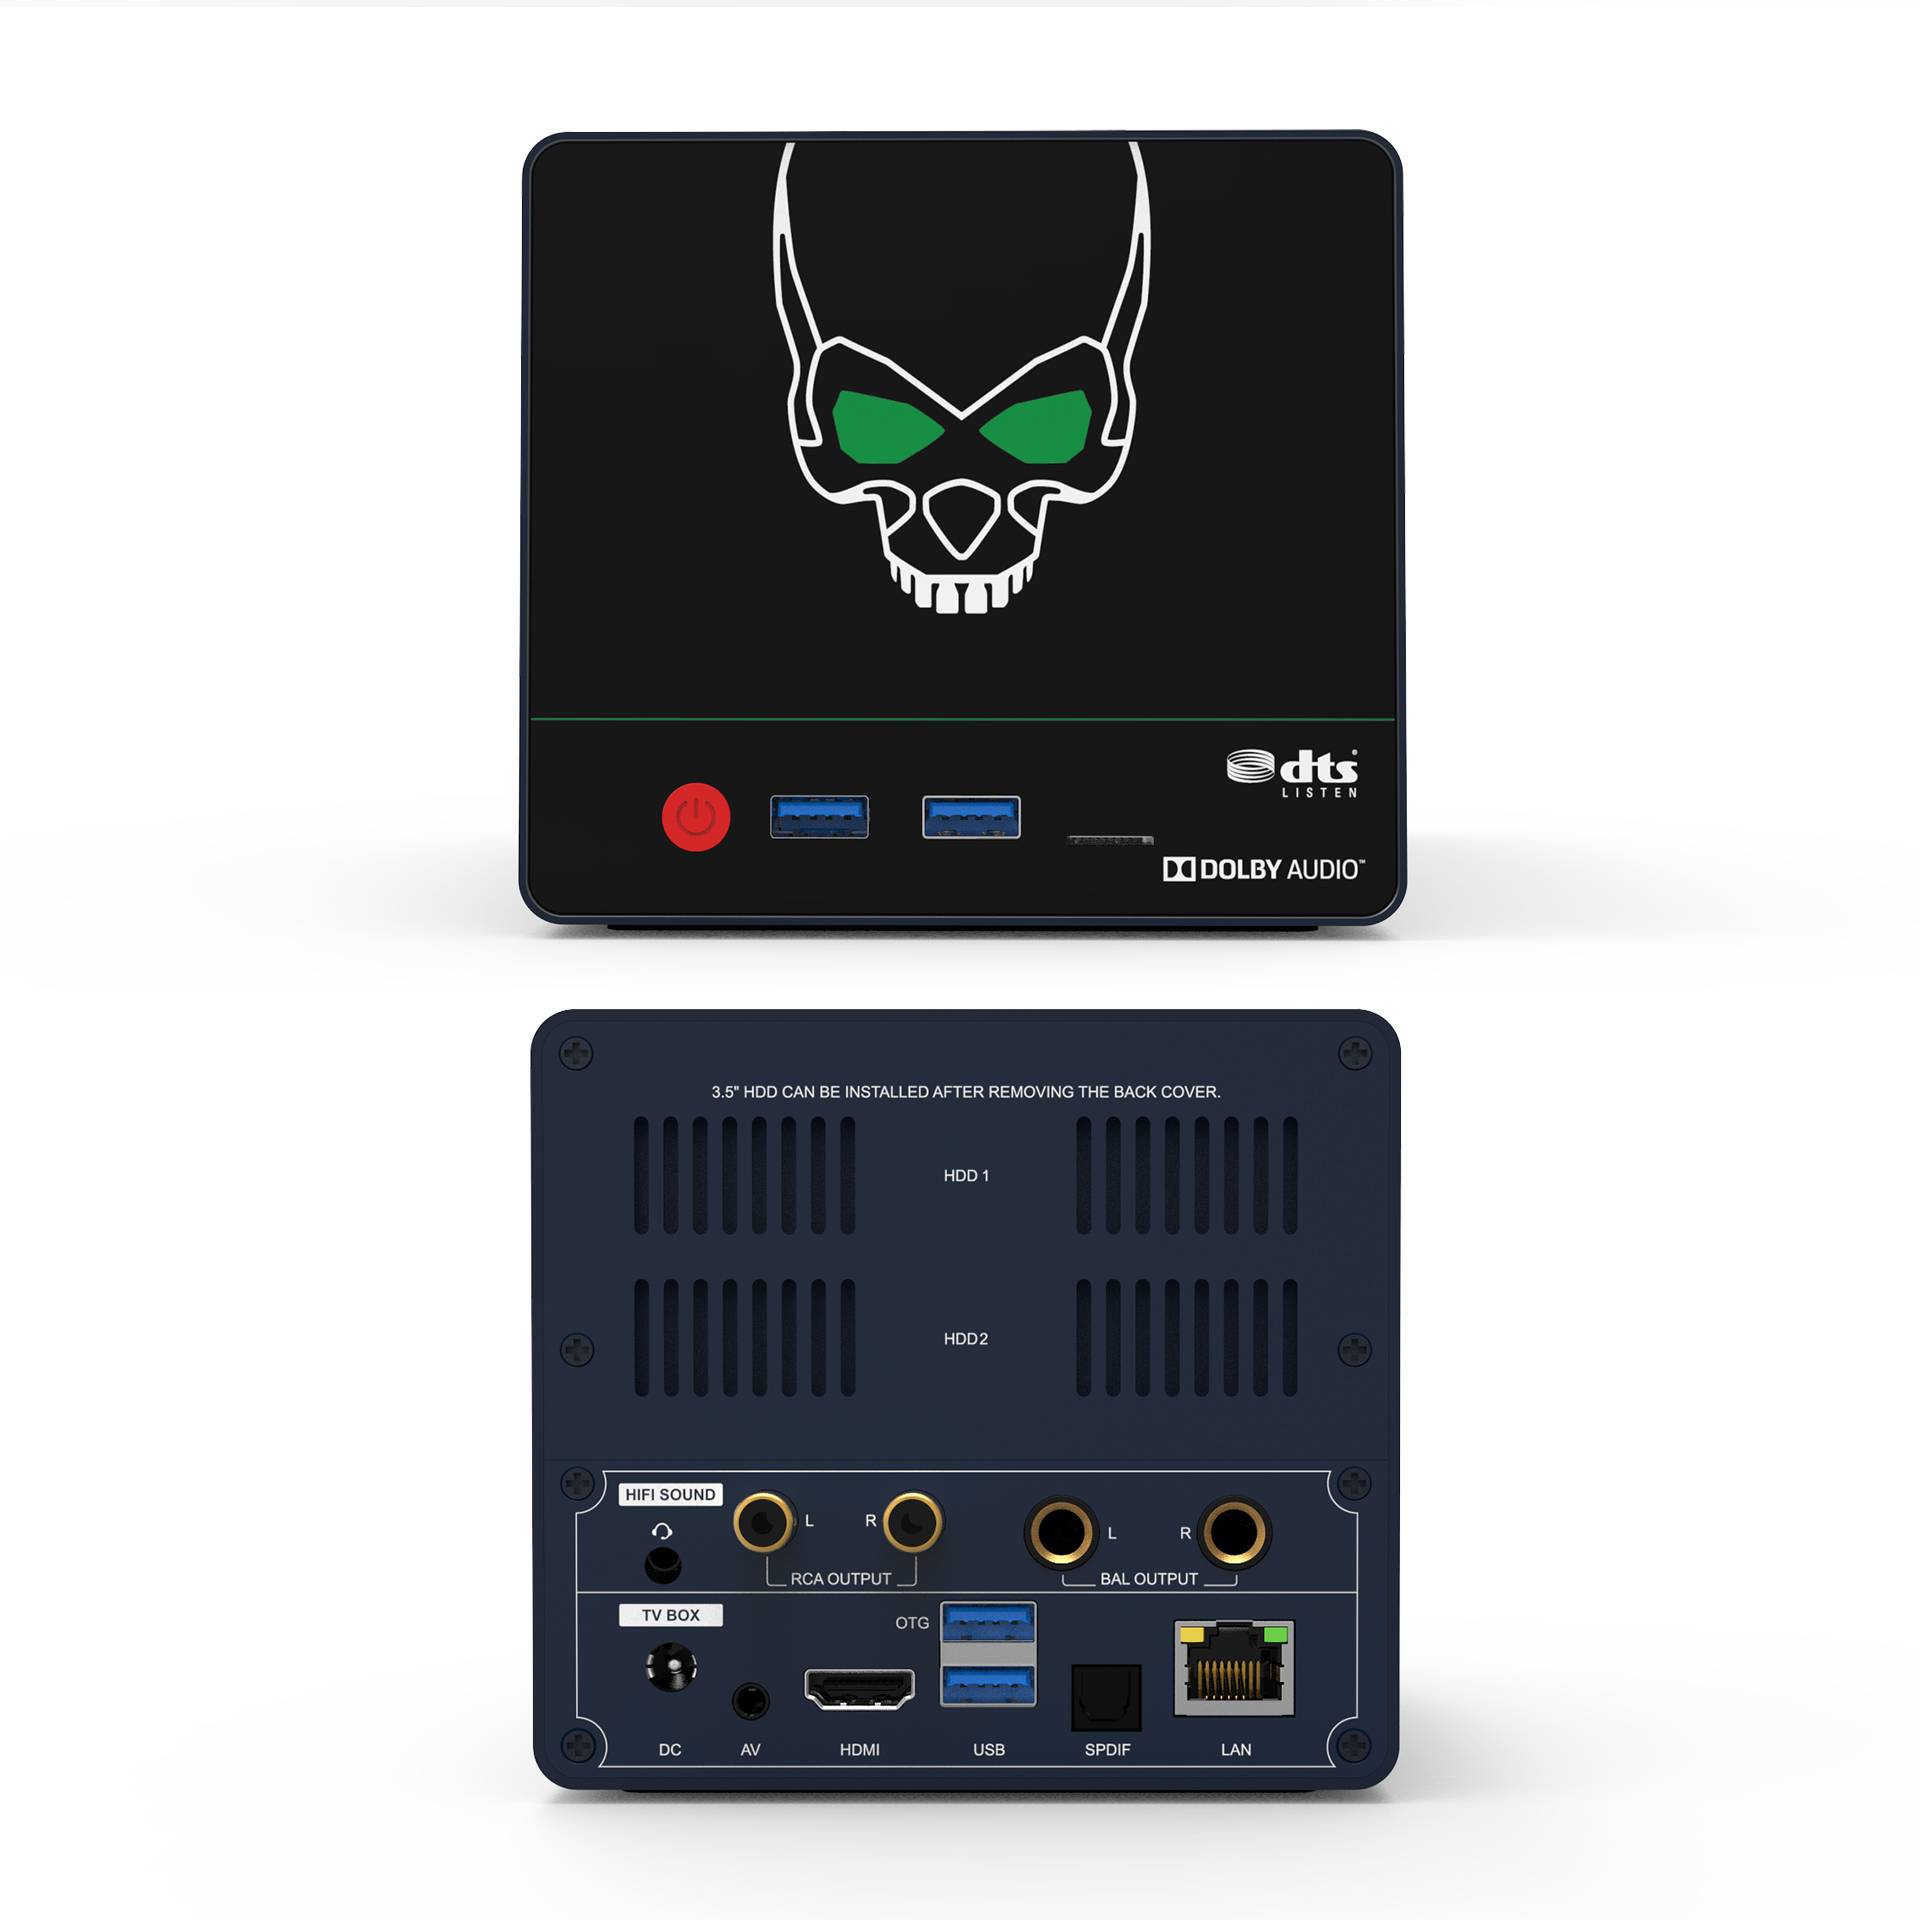 Beelink GS-King X Android BOX with Nas - Showing front I/O and rear I/O along with HDD Enclosure